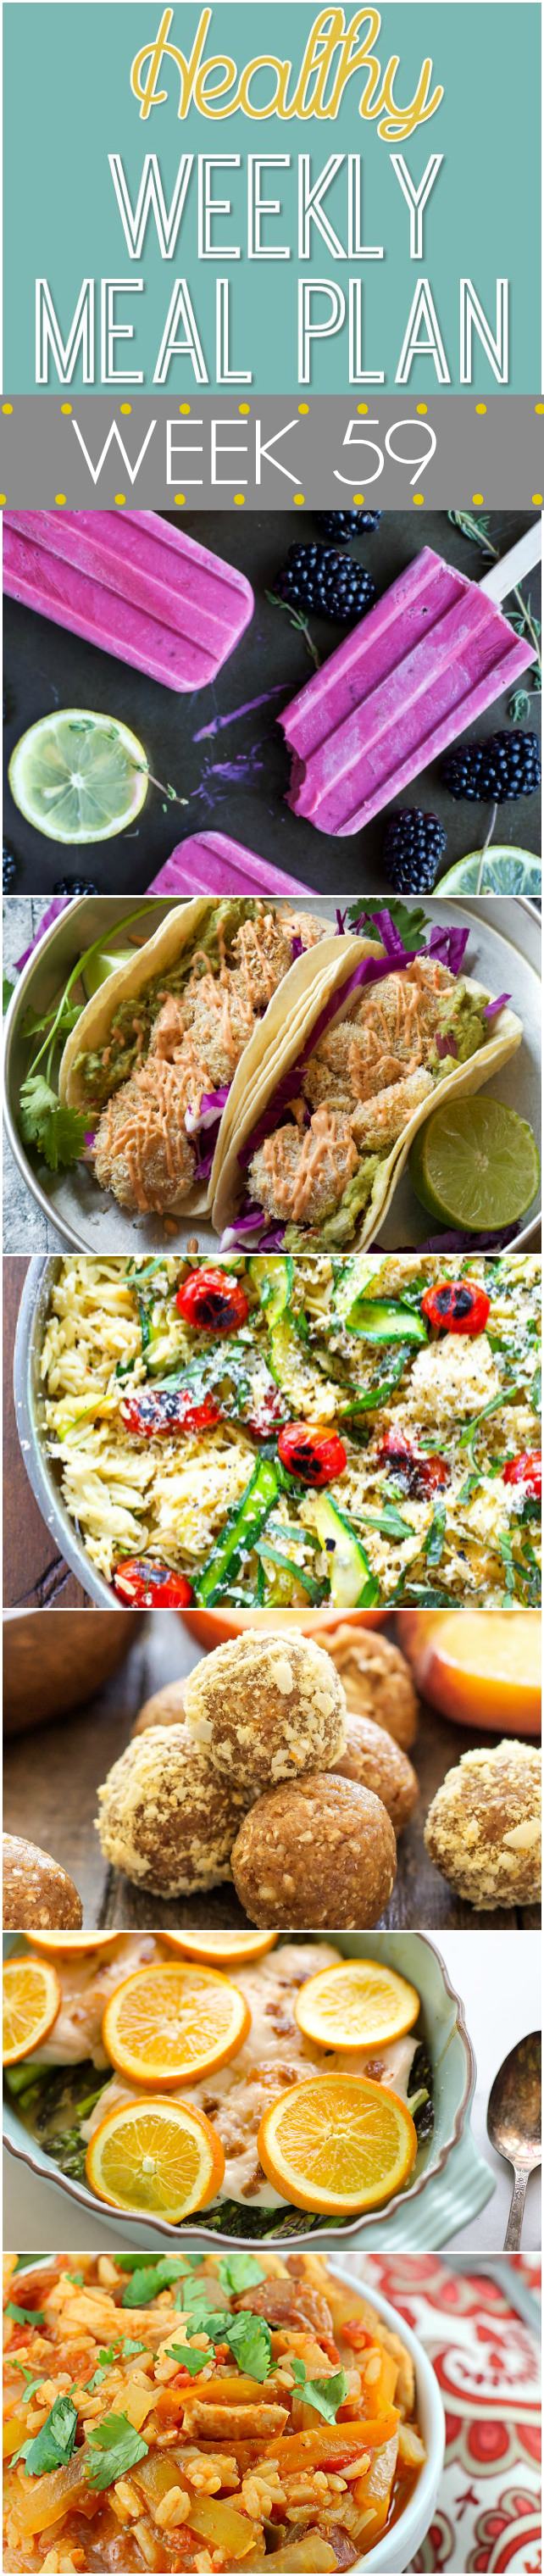 This week's healthy meal plan is savoring the last days of summer with a veggie-loaded orzo skillet, grilled zucchini with bruschetta topping and a green bean salad with radishes and bacon! 